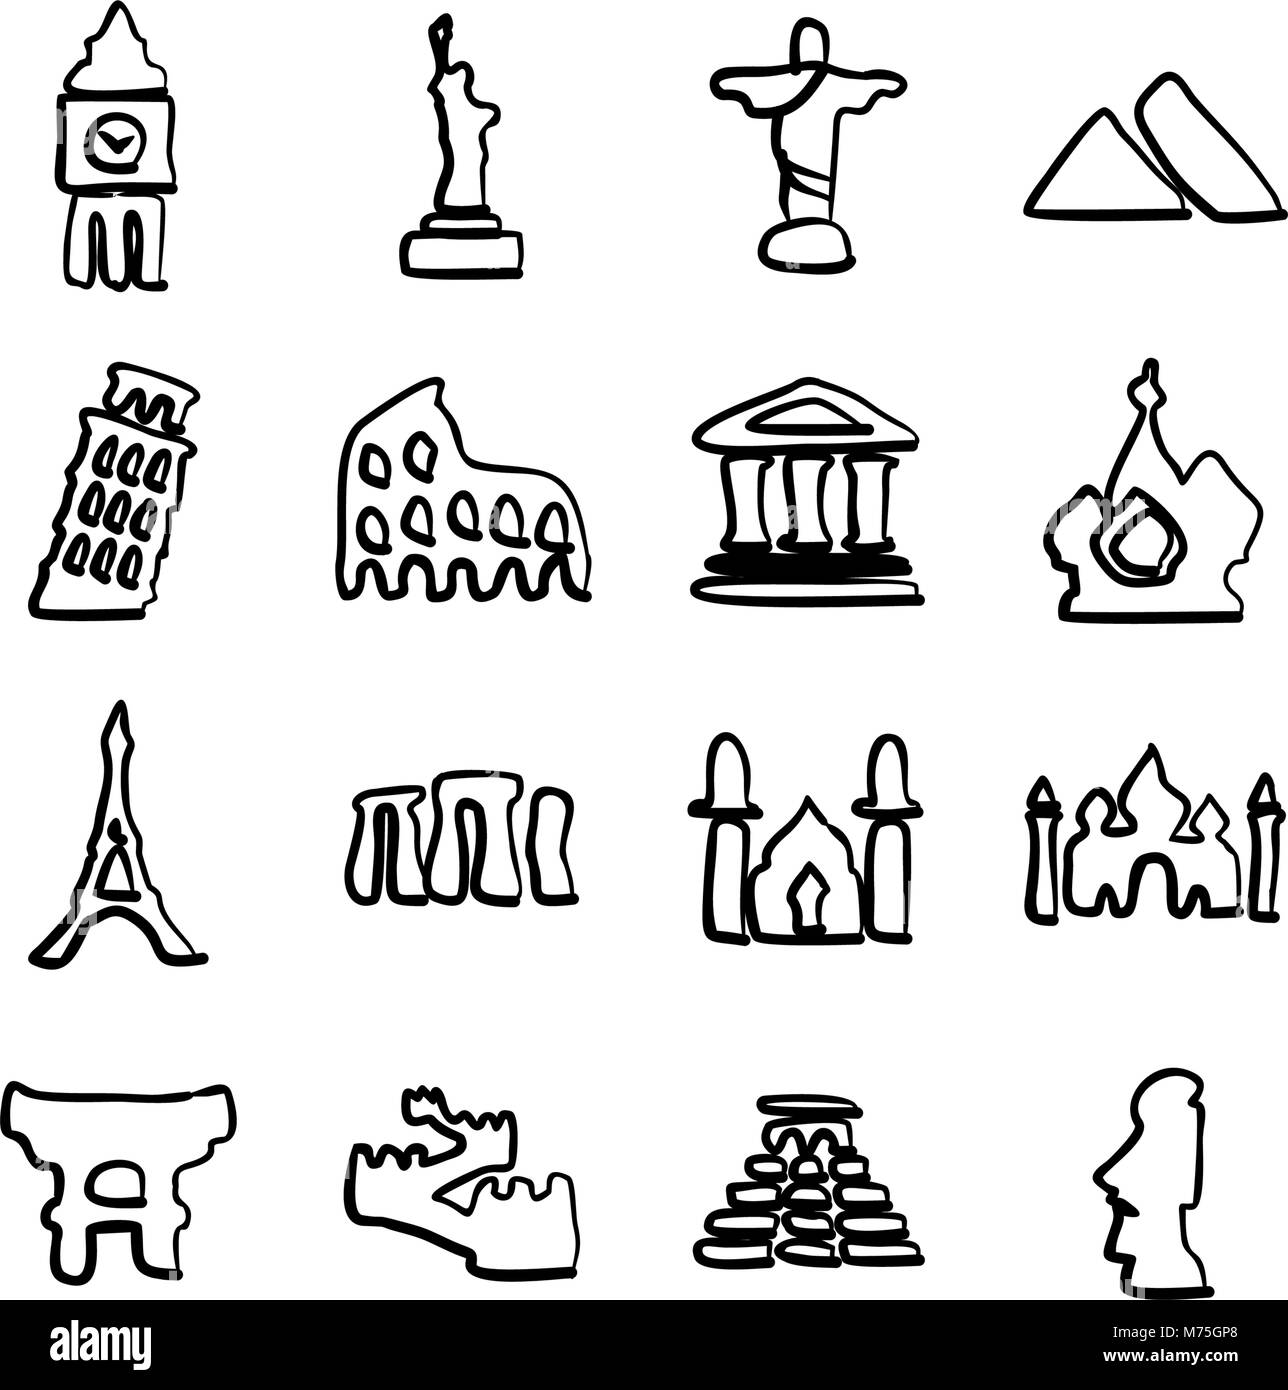 Landmarks Of The World Icons Freehand Stock Vector